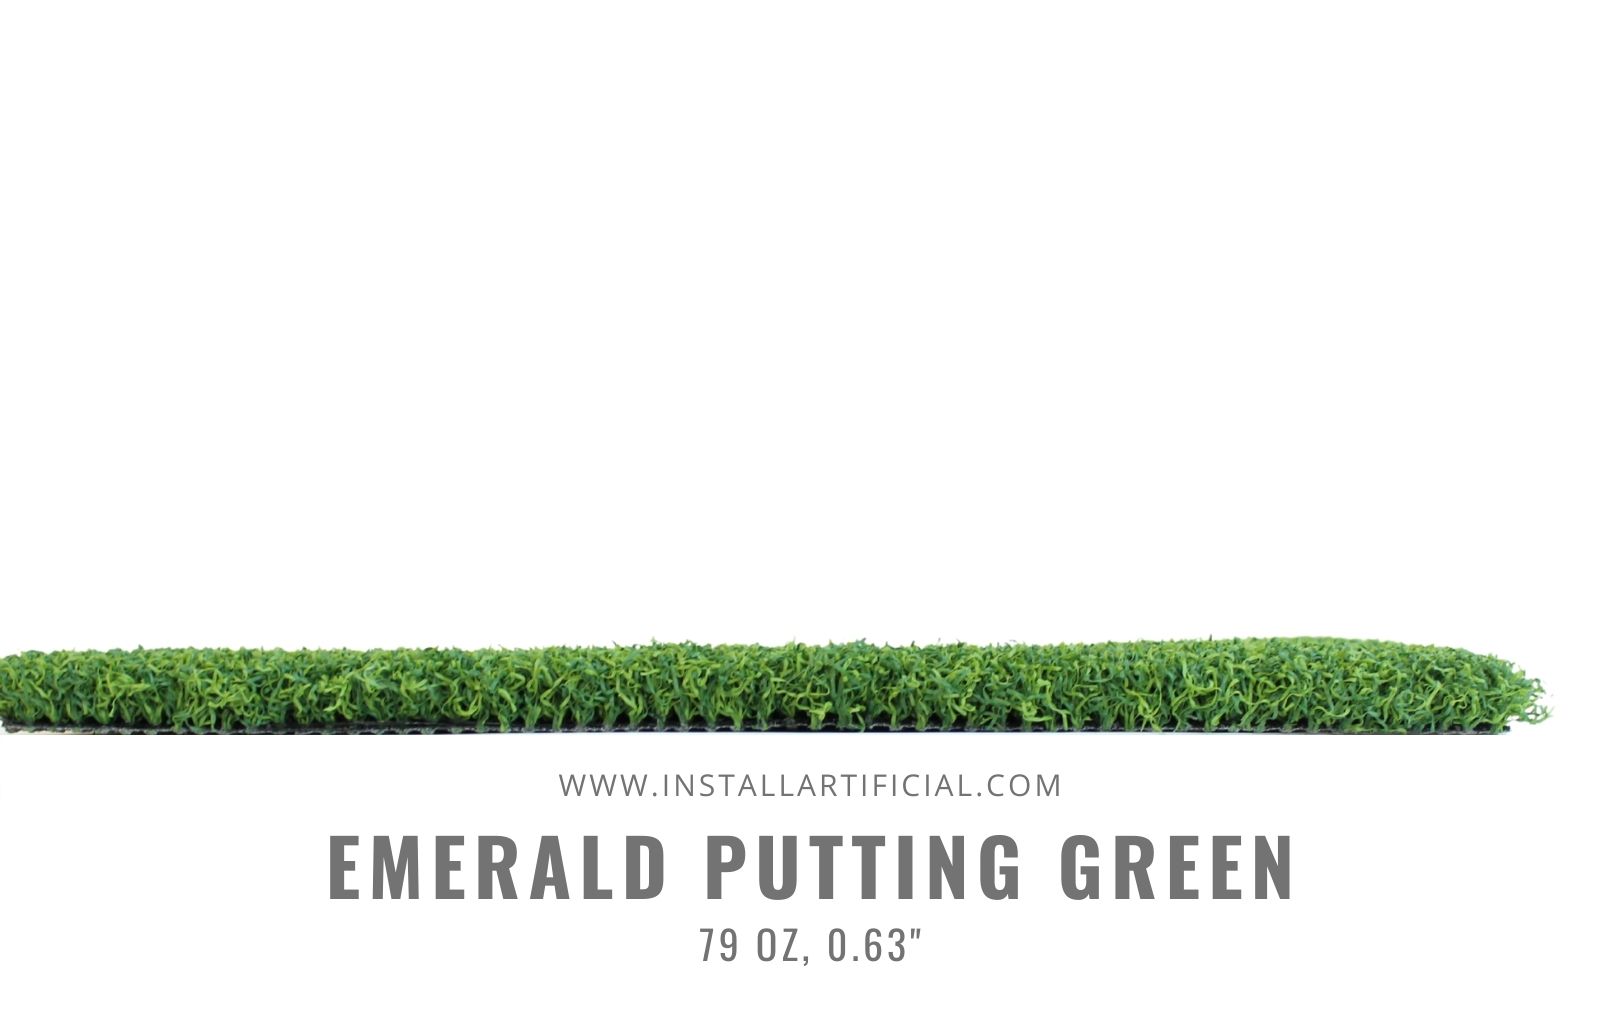 Emerald Putting Green, Purchase Green, side